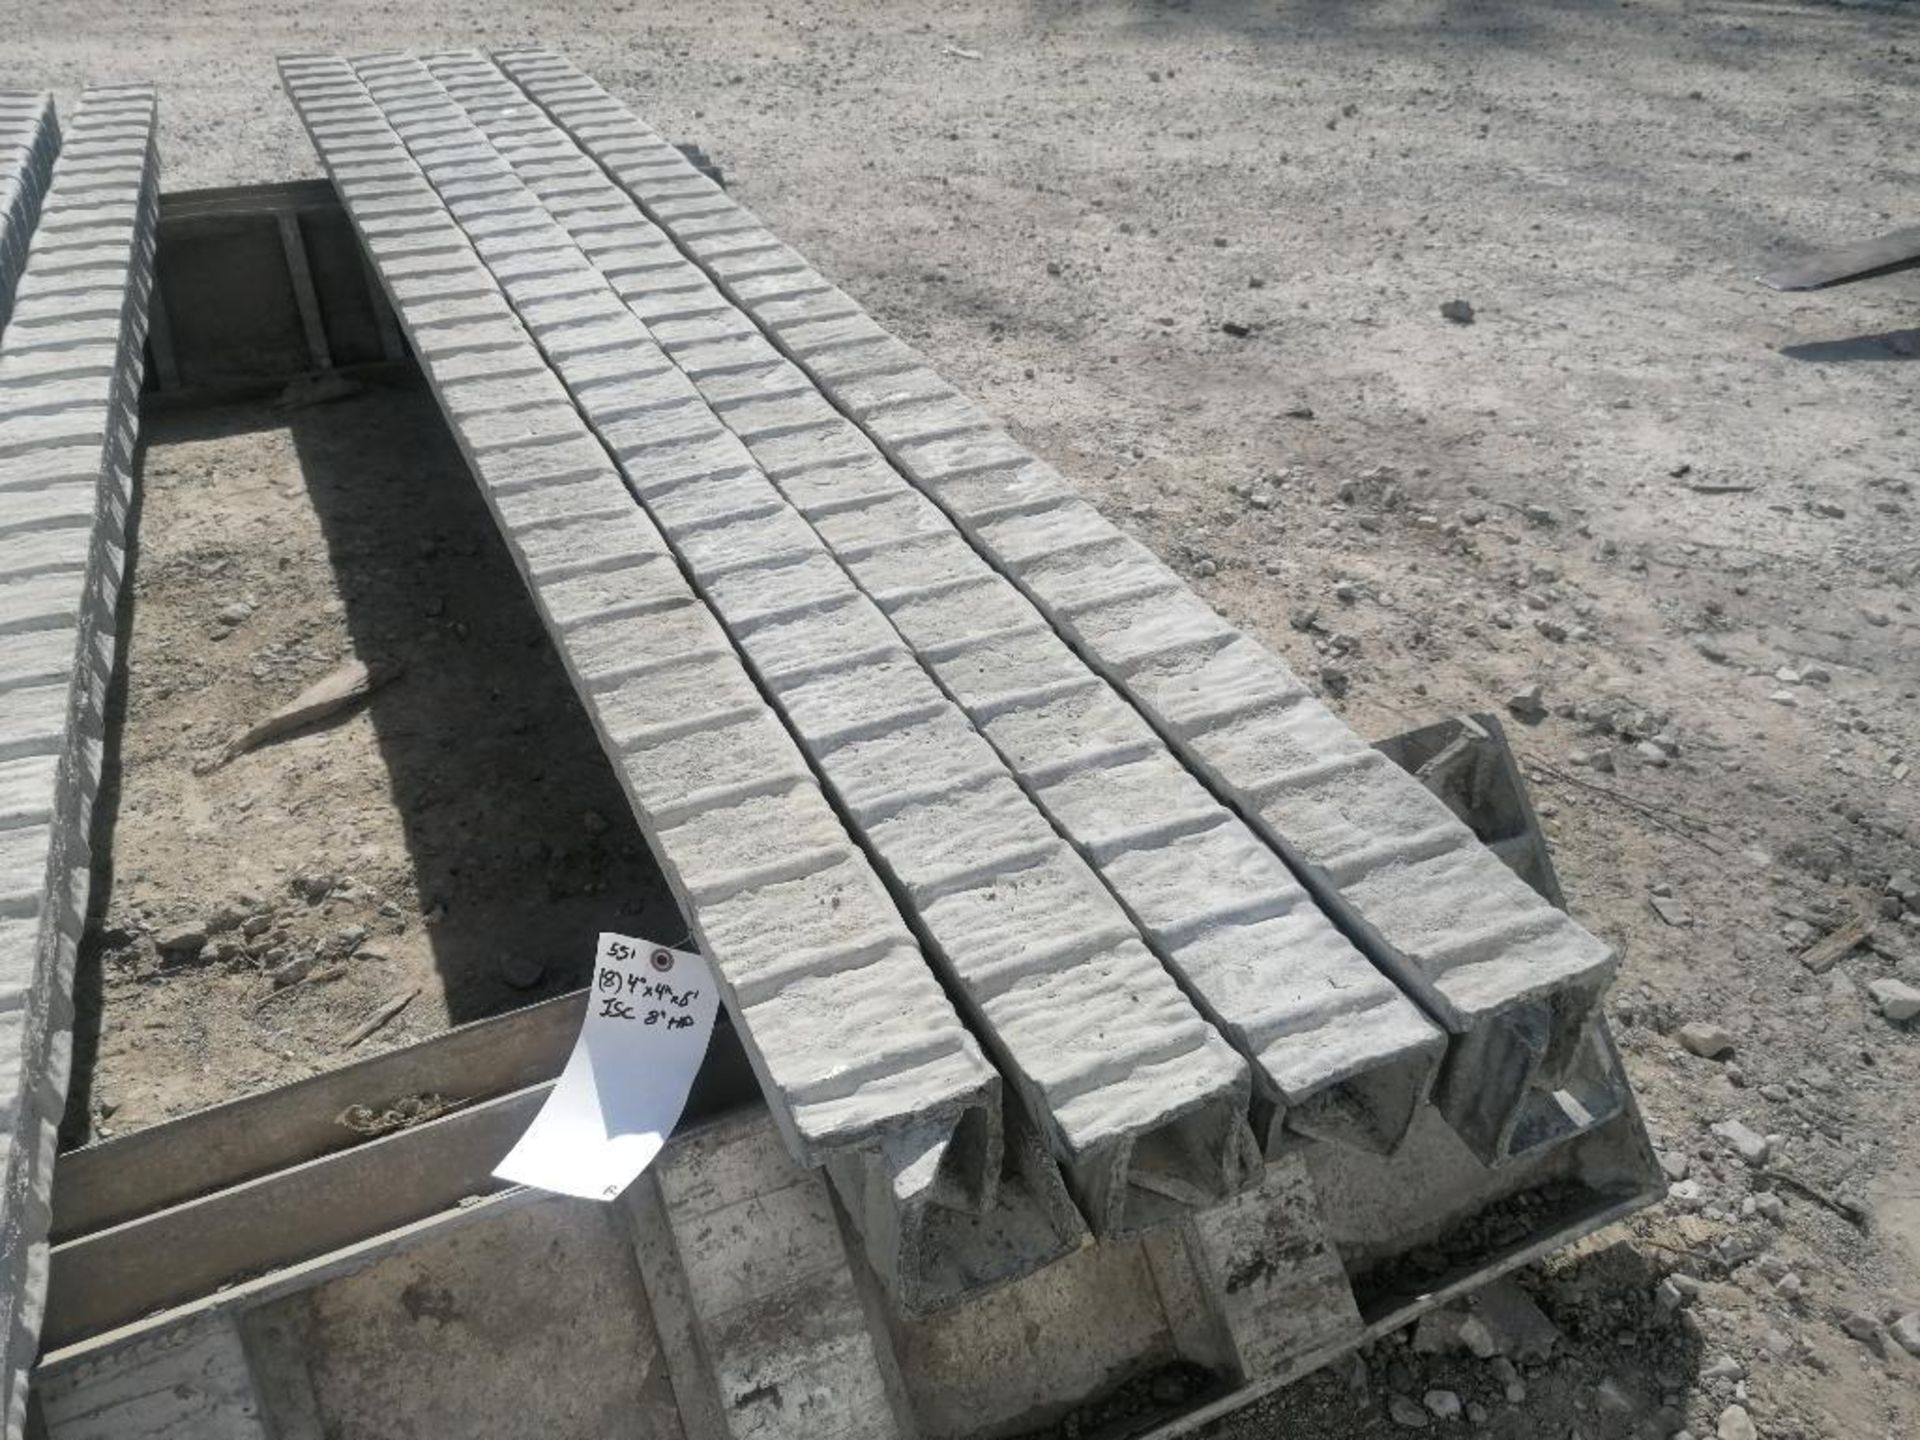 (8) 4" x 4" x 8' ISC Wall-Ties Textured Brick Aluminum Concrete Forms 8" Hole Pattern. Located in